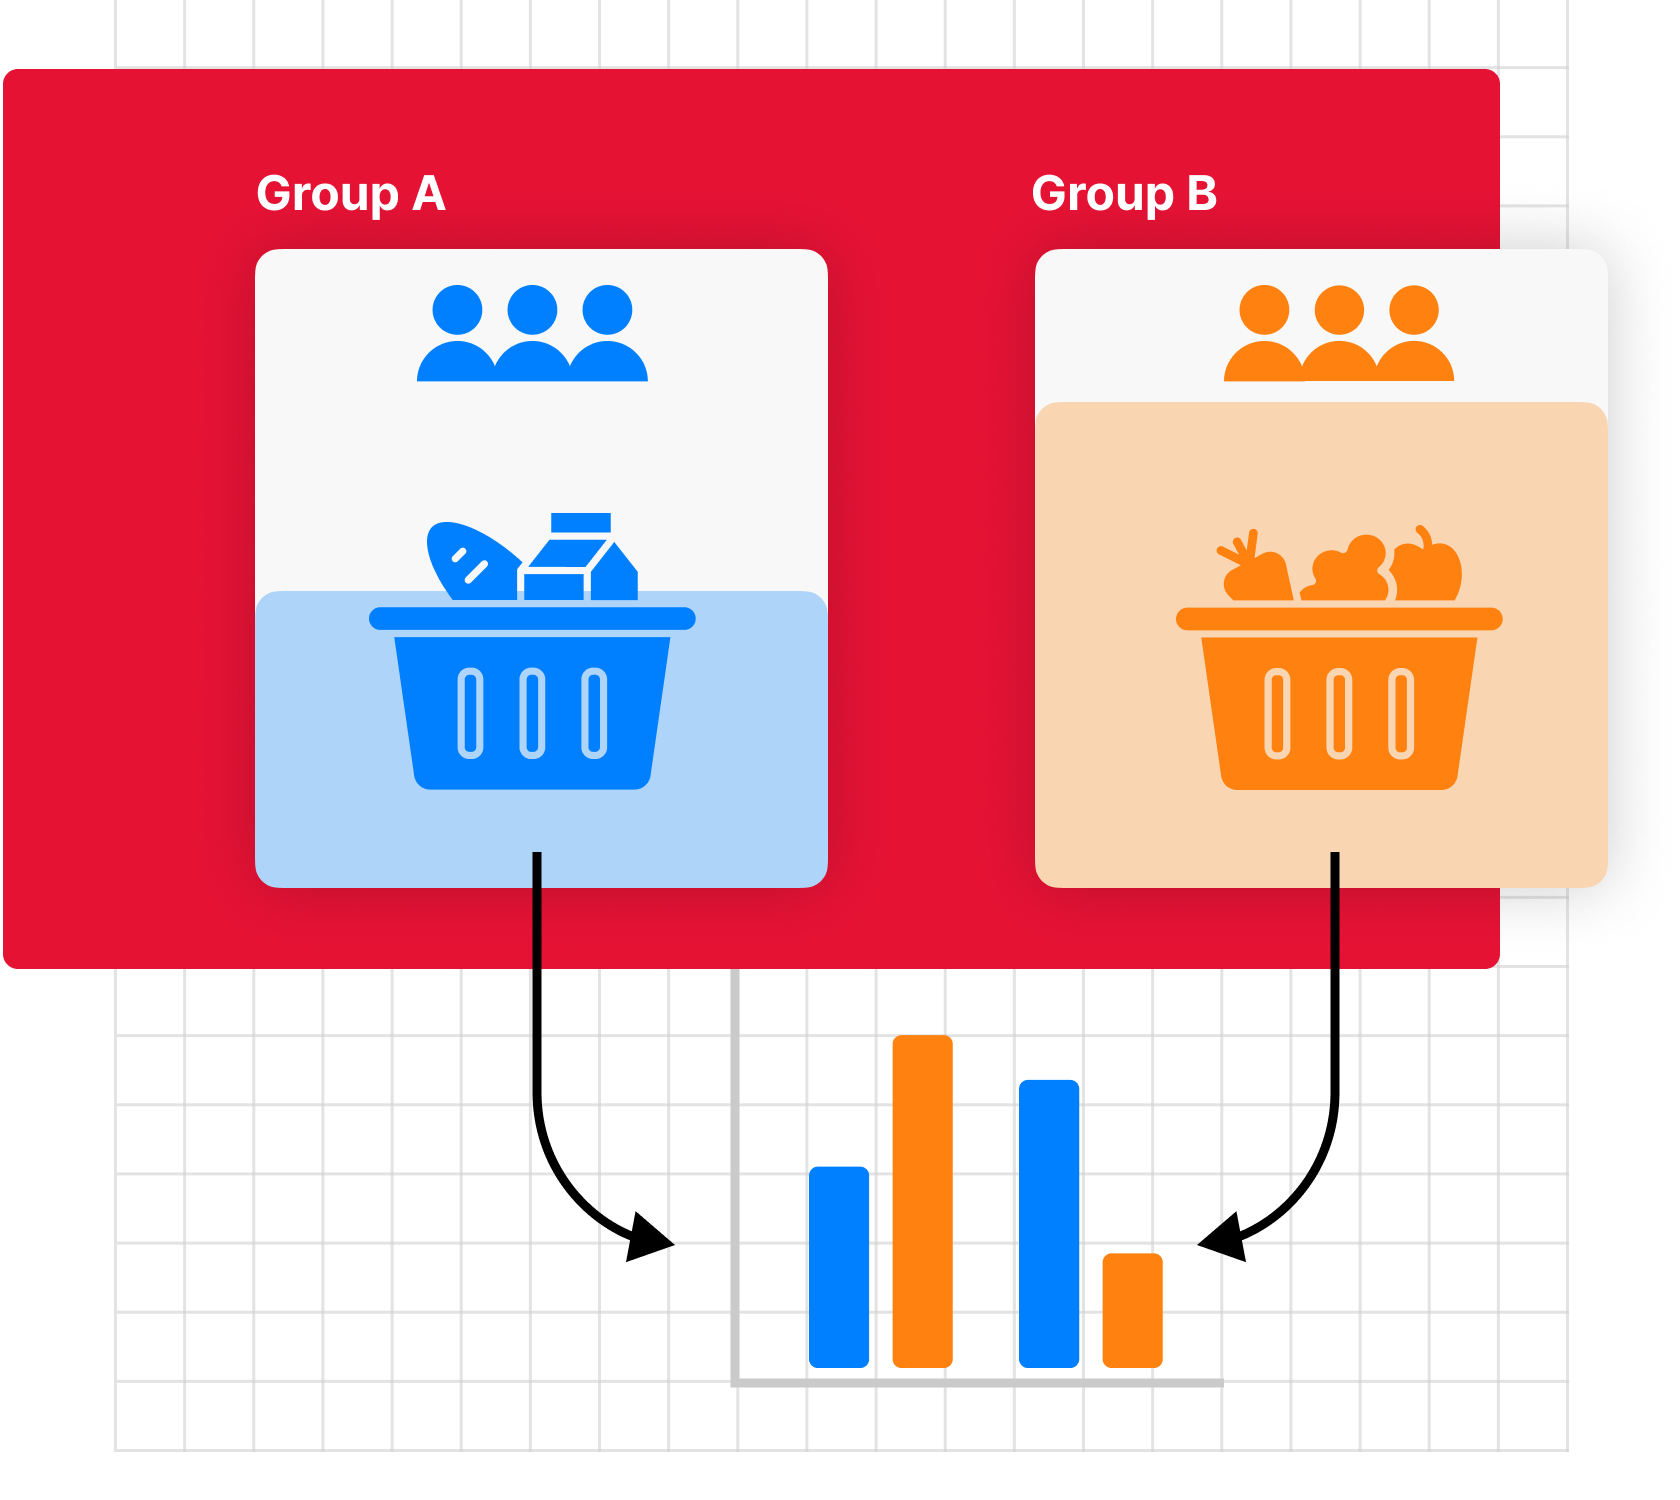 Infographic showing A/B testing shop basket with different participant groups.